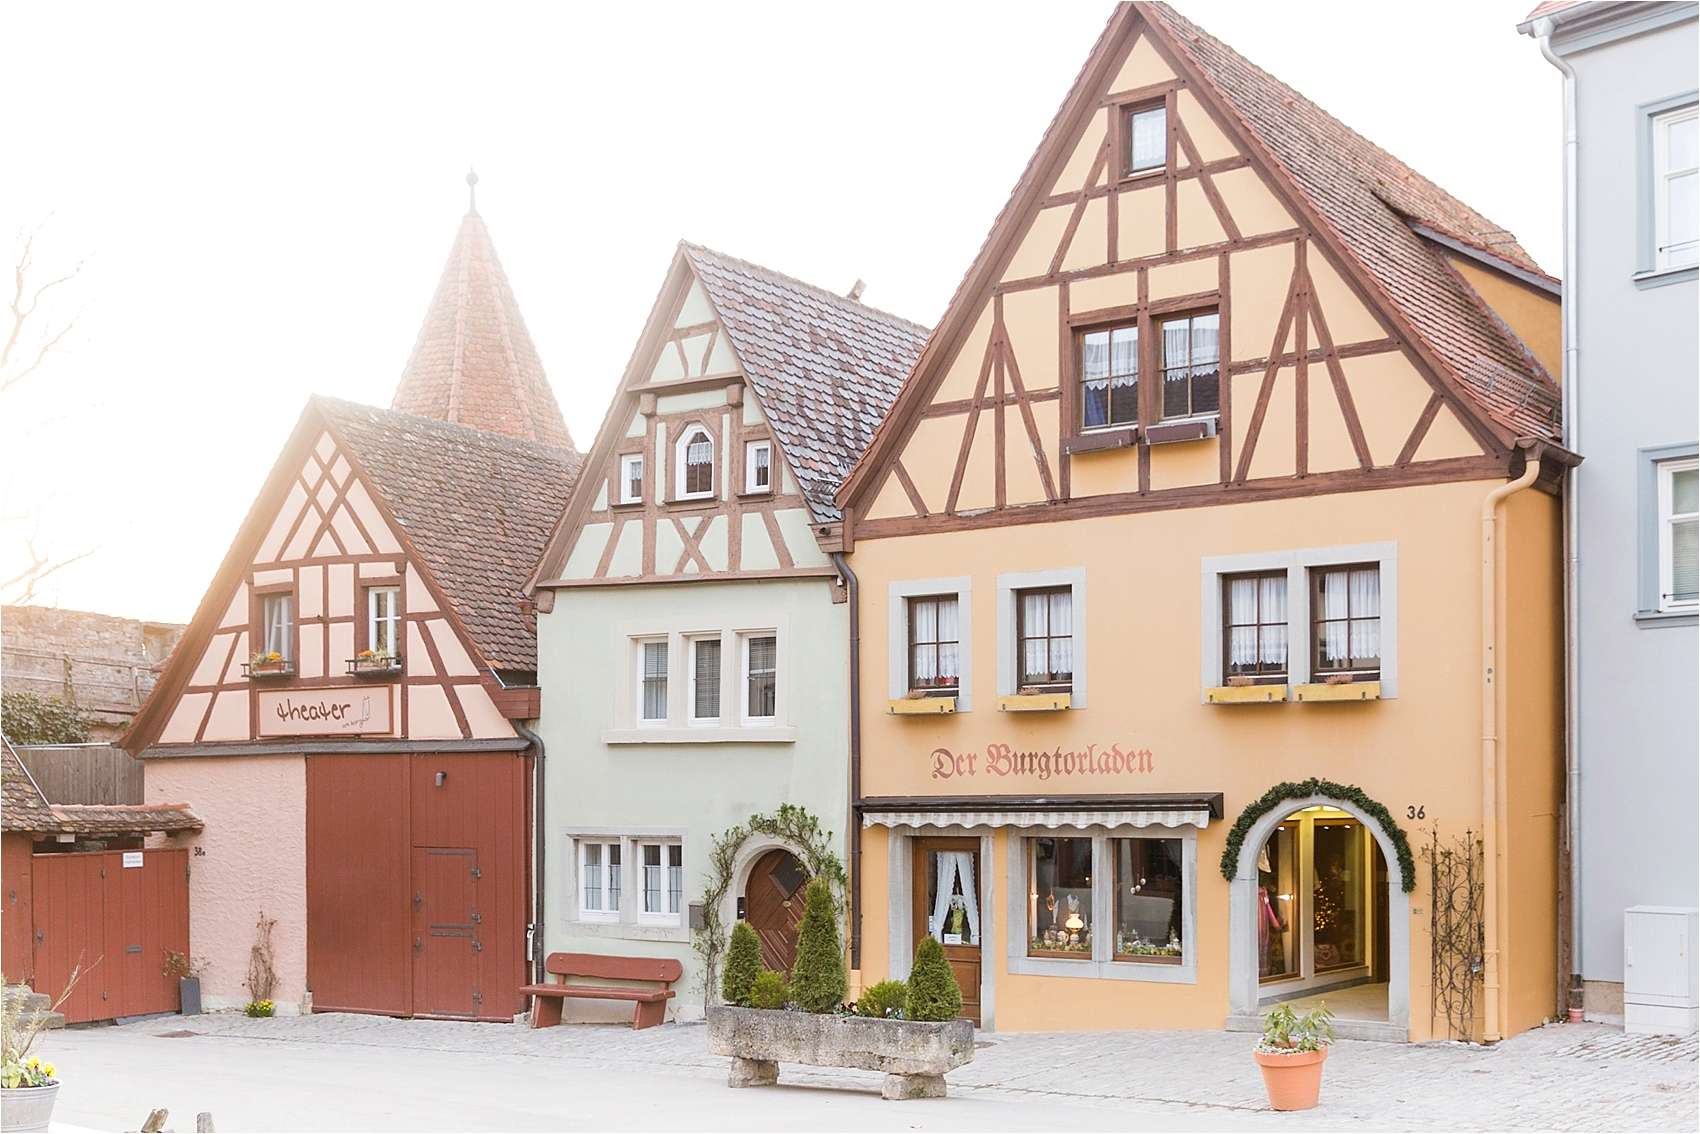 What to Do in Rothenburg, Strasburg and Colmar | Storybook European ...